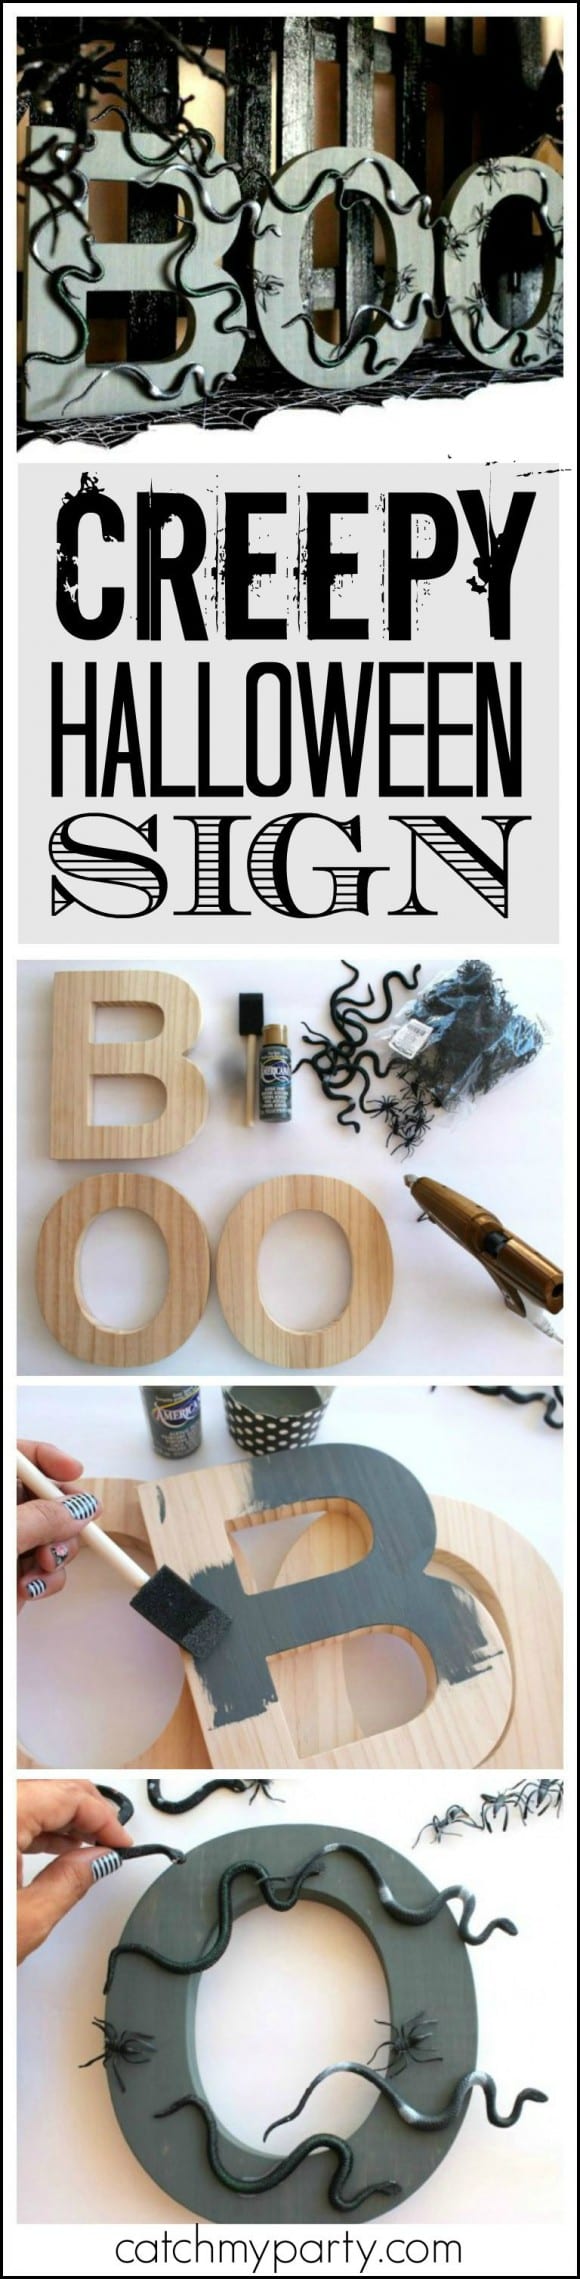 Creepy Halloween BOO Sign DIY with spiders and snakes | CatchMyParty.com